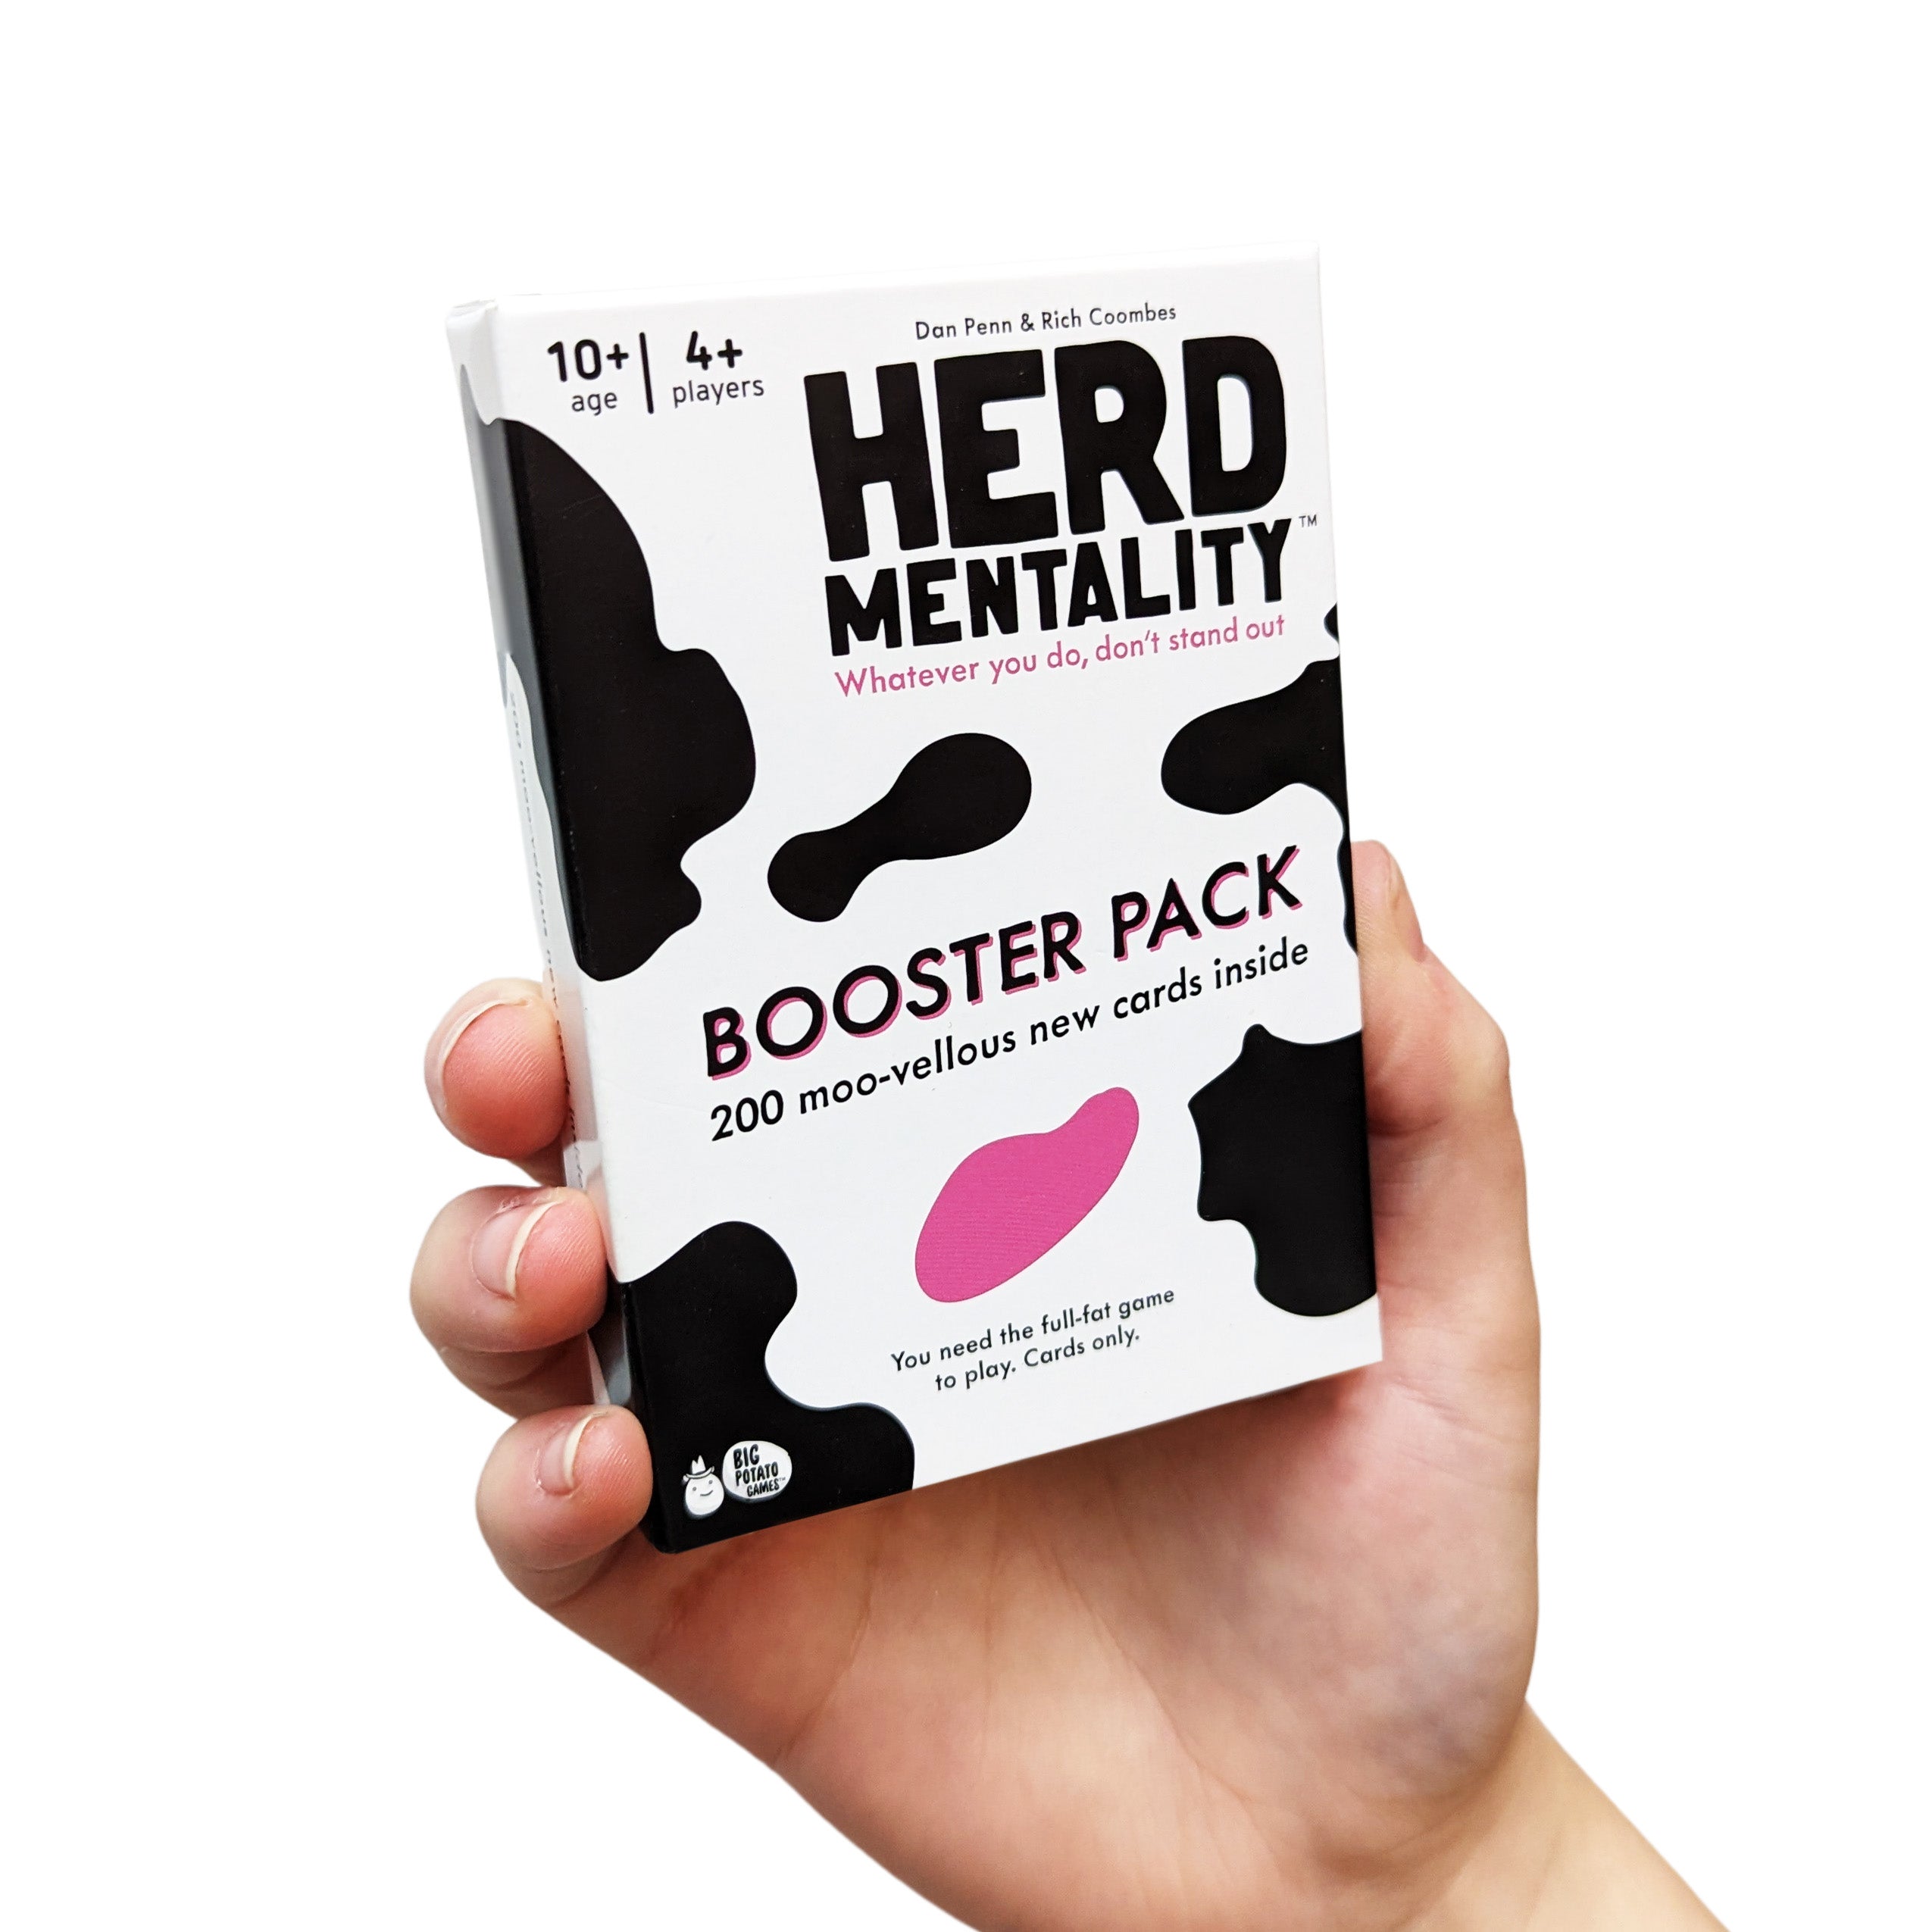 Hand holding Herd Mentality Booster Pack